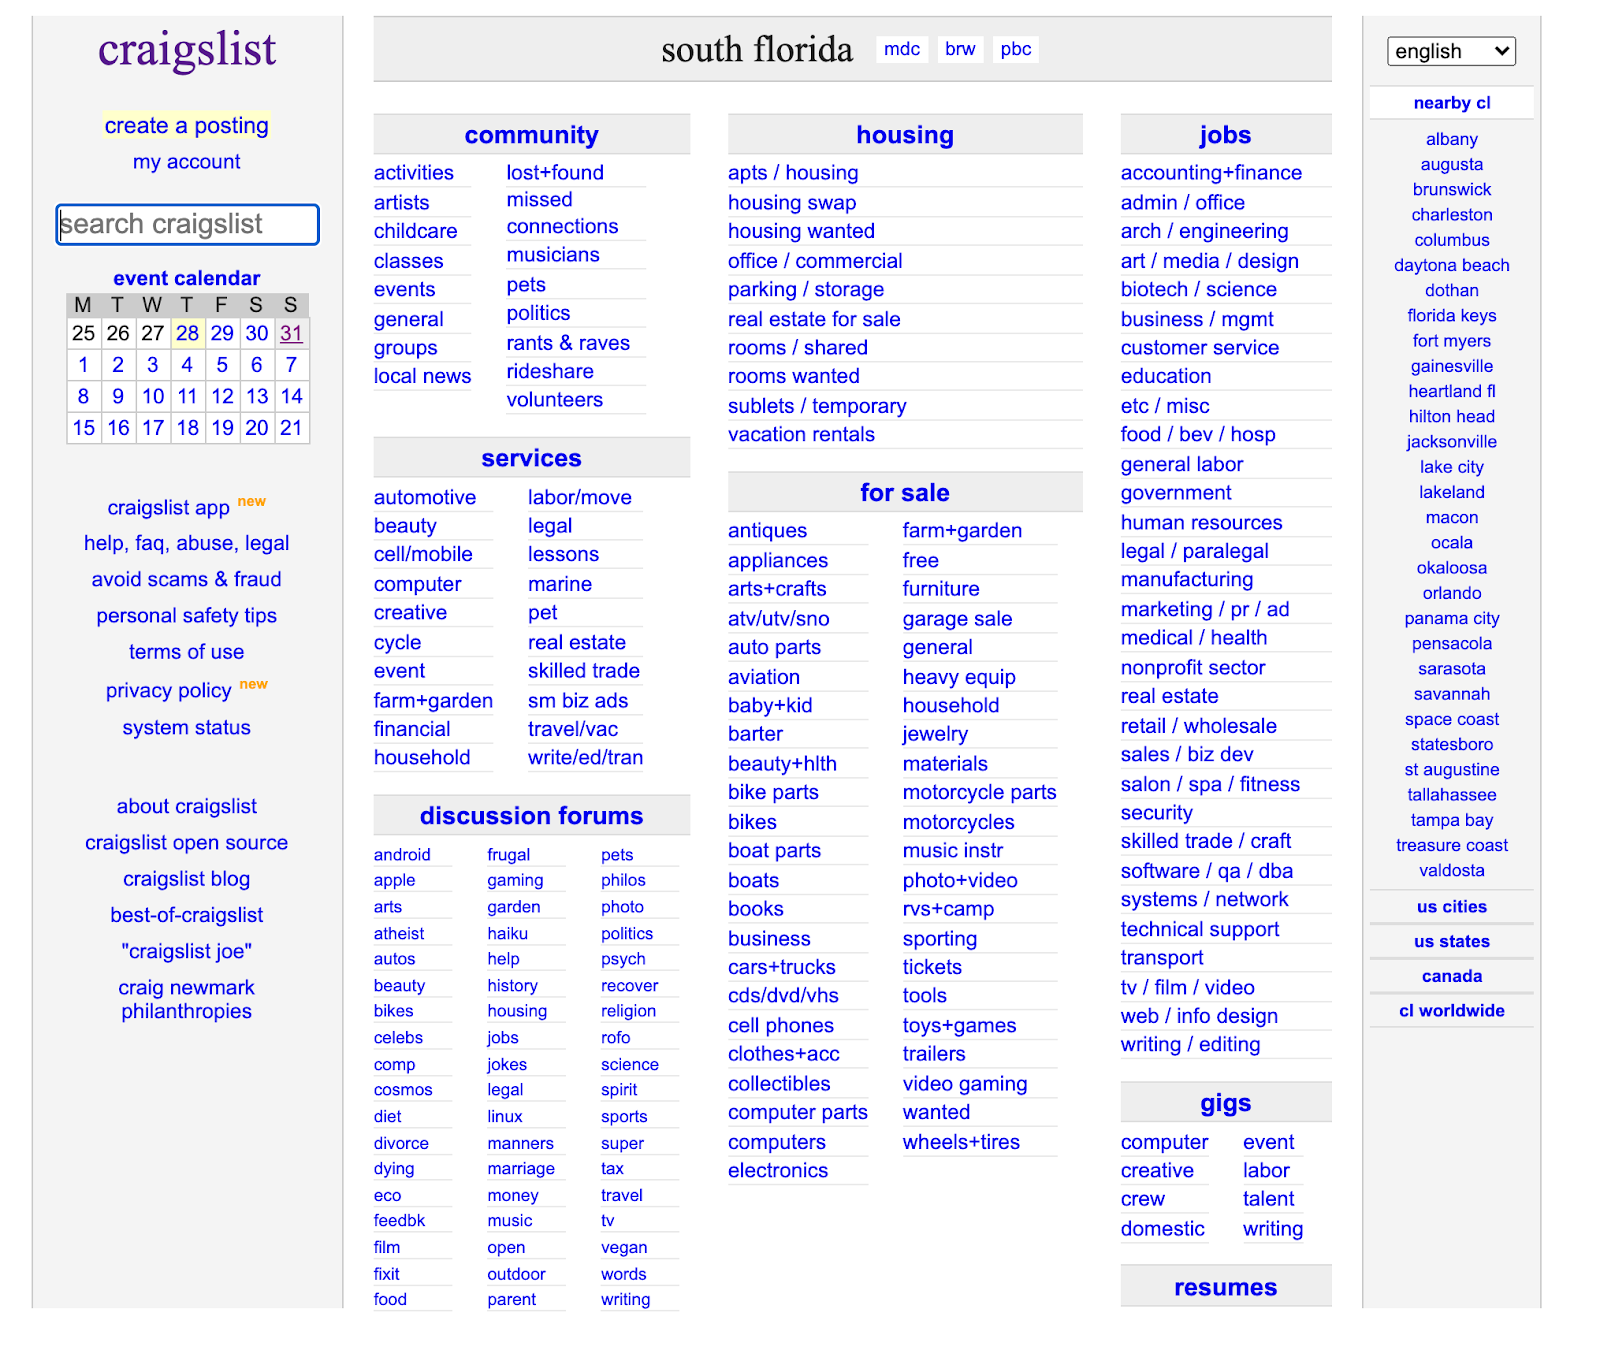 Lists of blue hyperlinked text with gray headings and gray sidebars.